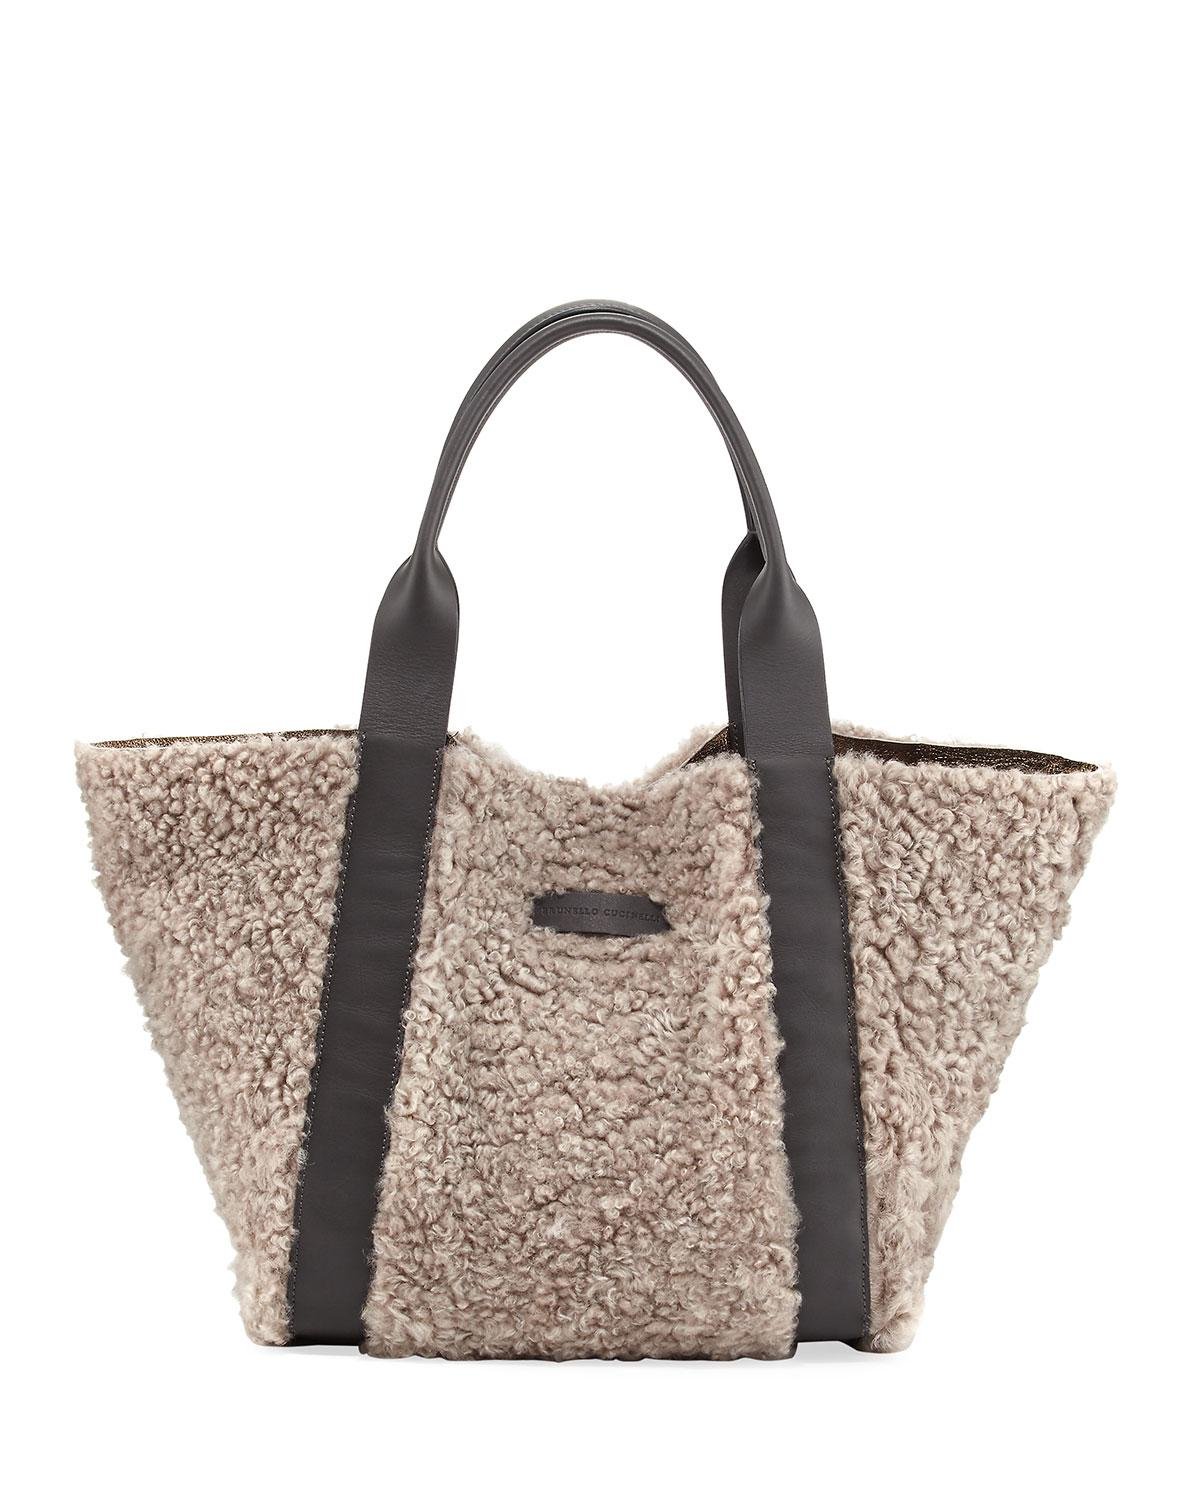 Lyst - Brunello Cucinelli Shearling-lined Metallic Leather Tote Bag in ...